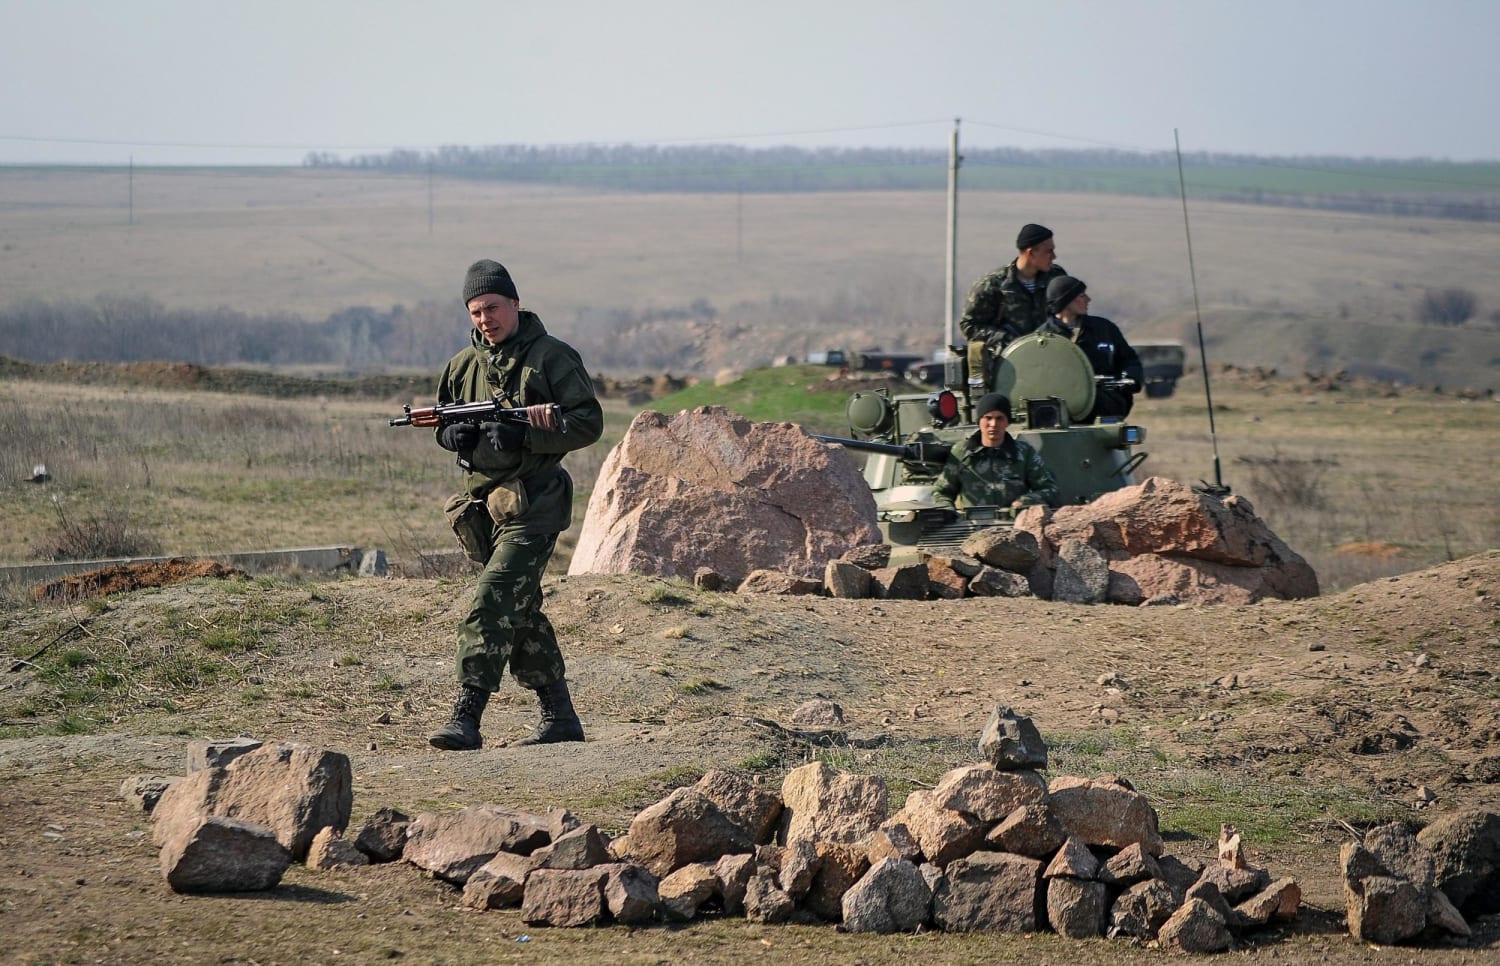 Tour of Ukraine-Russia Border Finds No Signs of Military Buildup